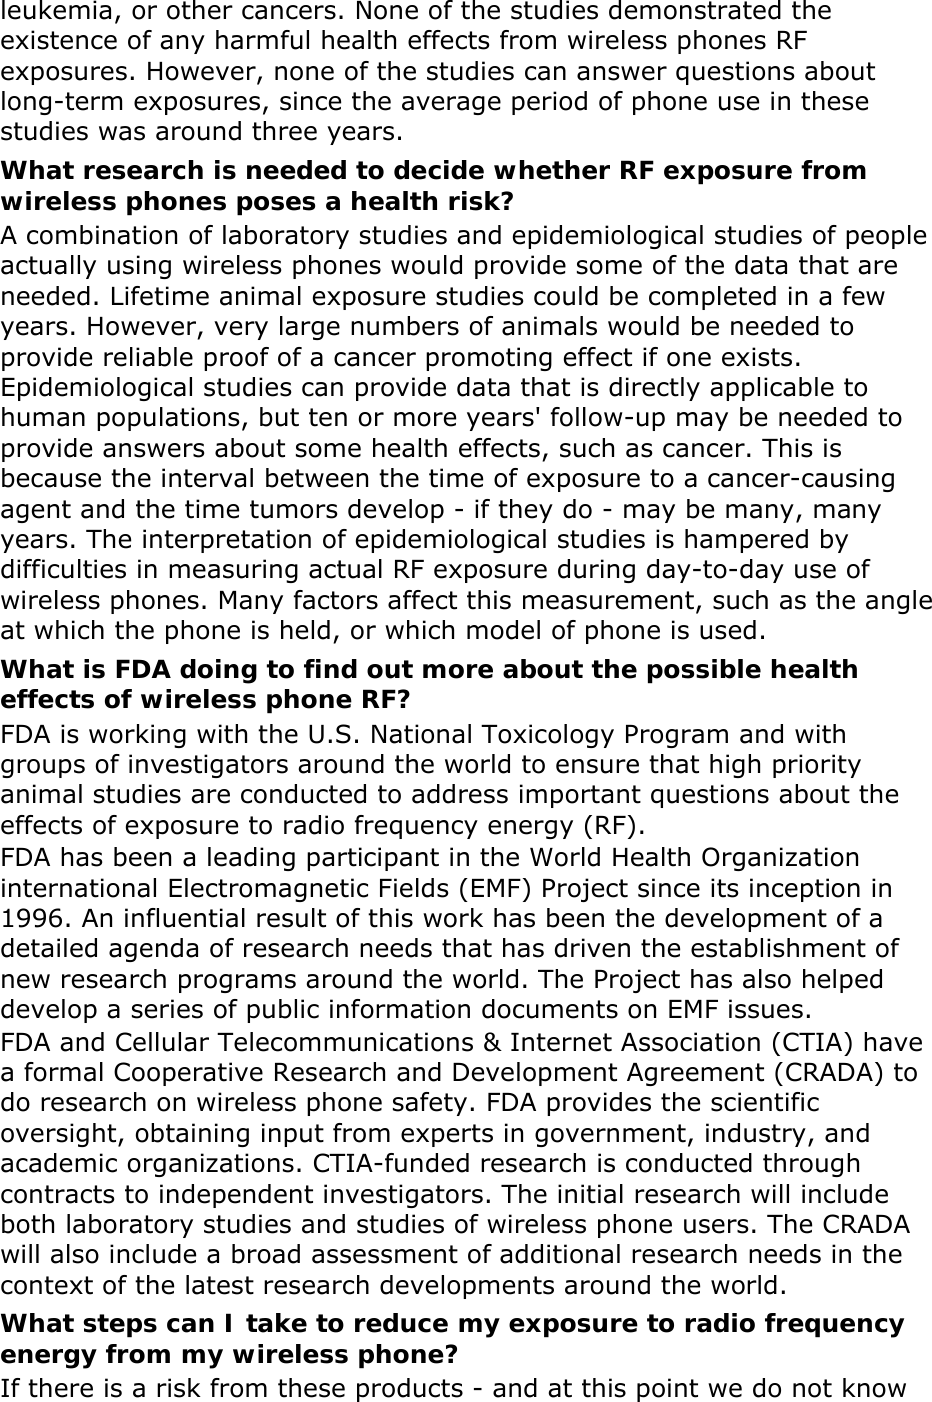 leukemia, or other cancers. None of the studies demonstrated the existence of any harmful health effects from wireless phones RF exposures. However, none of the studies can answer questions about long-term exposures, since the average period of phone use in these studies was around three years. What research is needed to decide whether RF exposure from wireless phones poses a health risk? A combination of laboratory studies and epidemiological studies of people actually using wireless phones would provide some of the data that are needed. Lifetime animal exposure studies could be completed in a few years. However, very large numbers of animals would be needed to provide reliable proof of a cancer promoting effect if one exists. Epidemiological studies can provide data that is directly applicable to human populations, but ten or more years&apos; follow-up may be needed to provide answers about some health effects, such as cancer. This is because the interval between the time of exposure to a cancer-causing agent and the time tumors develop - if they do - may be many, many years. The interpretation of epidemiological studies is hampered by difficulties in measuring actual RF exposure during day-to-day use of wireless phones. Many factors affect this measurement, such as the angle at which the phone is held, or which model of phone is used. What is FDA doing to find out more about the possible health effects of wireless phone RF? FDA is working with the U.S. National Toxicology Program and with groups of investigators around the world to ensure that high priority animal studies are conducted to address important questions about the effects of exposure to radio frequency energy (RF). FDA has been a leading participant in the World Health Organization international Electromagnetic Fields (EMF) Project since its inception in 1996. An influential result of this work has been the development of a detailed agenda of research needs that has driven the establishment of new research programs around the world. The Project has also helped develop a series of public information documents on EMF issues. FDA and Cellular Telecommunications &amp; Internet Association (CTIA) have a formal Cooperative Research and Development Agreement (CRADA) to do research on wireless phone safety. FDA provides the scientific oversight, obtaining input from experts in government, industry, and academic organizations. CTIA-funded research is conducted through contracts to independent investigators. The initial research will include both laboratory studies and studies of wireless phone users. The CRADA will also include a broad assessment of additional research needs in the context of the latest research developments around the world. What steps can I take to reduce my exposure to radio frequency energy from my wireless phone? If there is a risk from these products - and at this point we do not know 